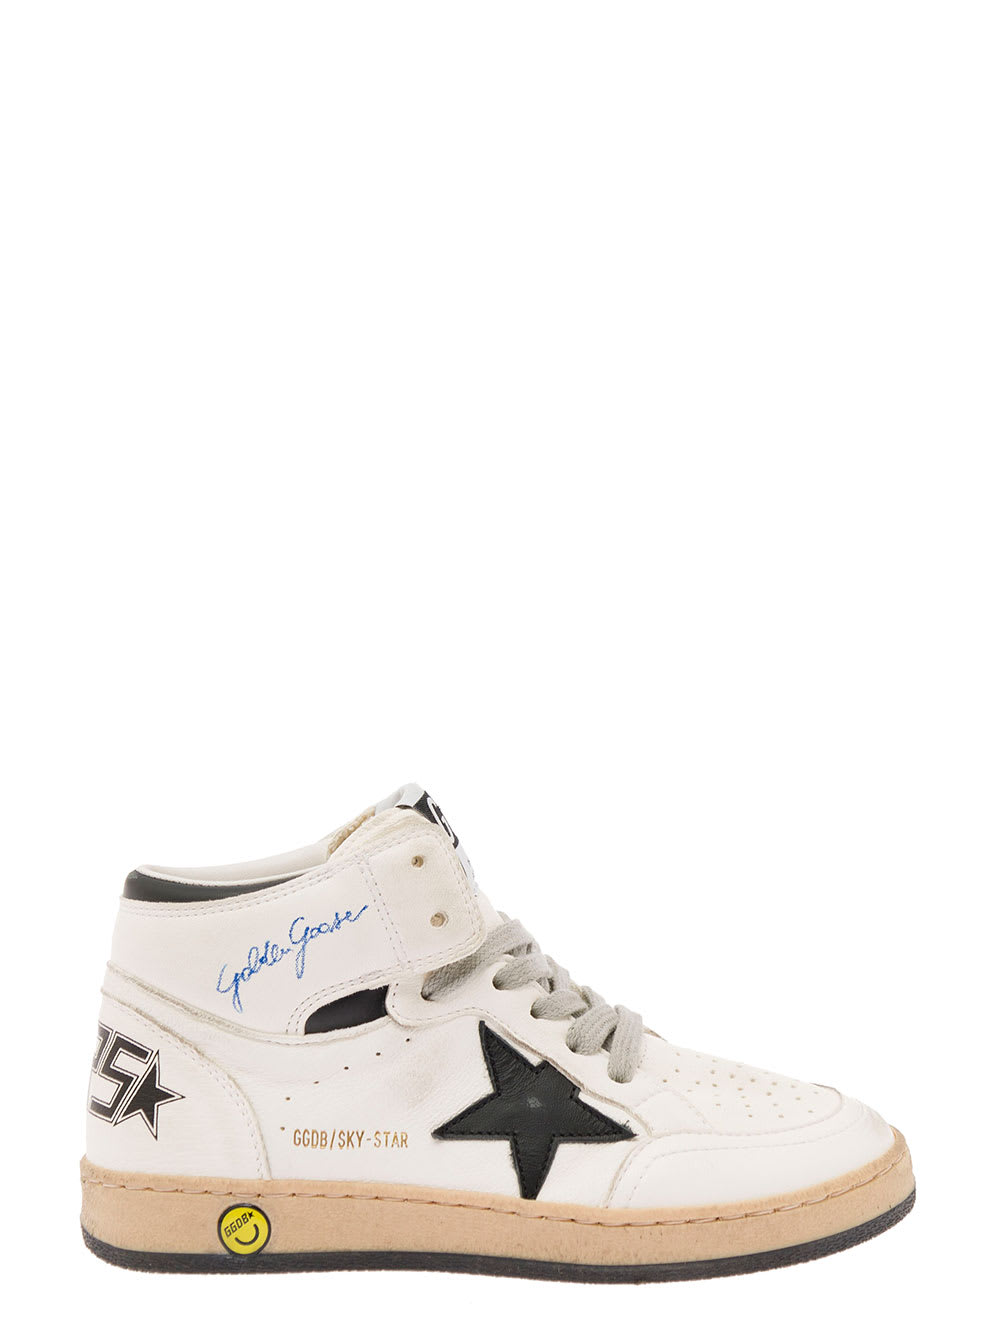 White Nappa Leather Sneakers sky Star Young Boy Golden Goose Kids